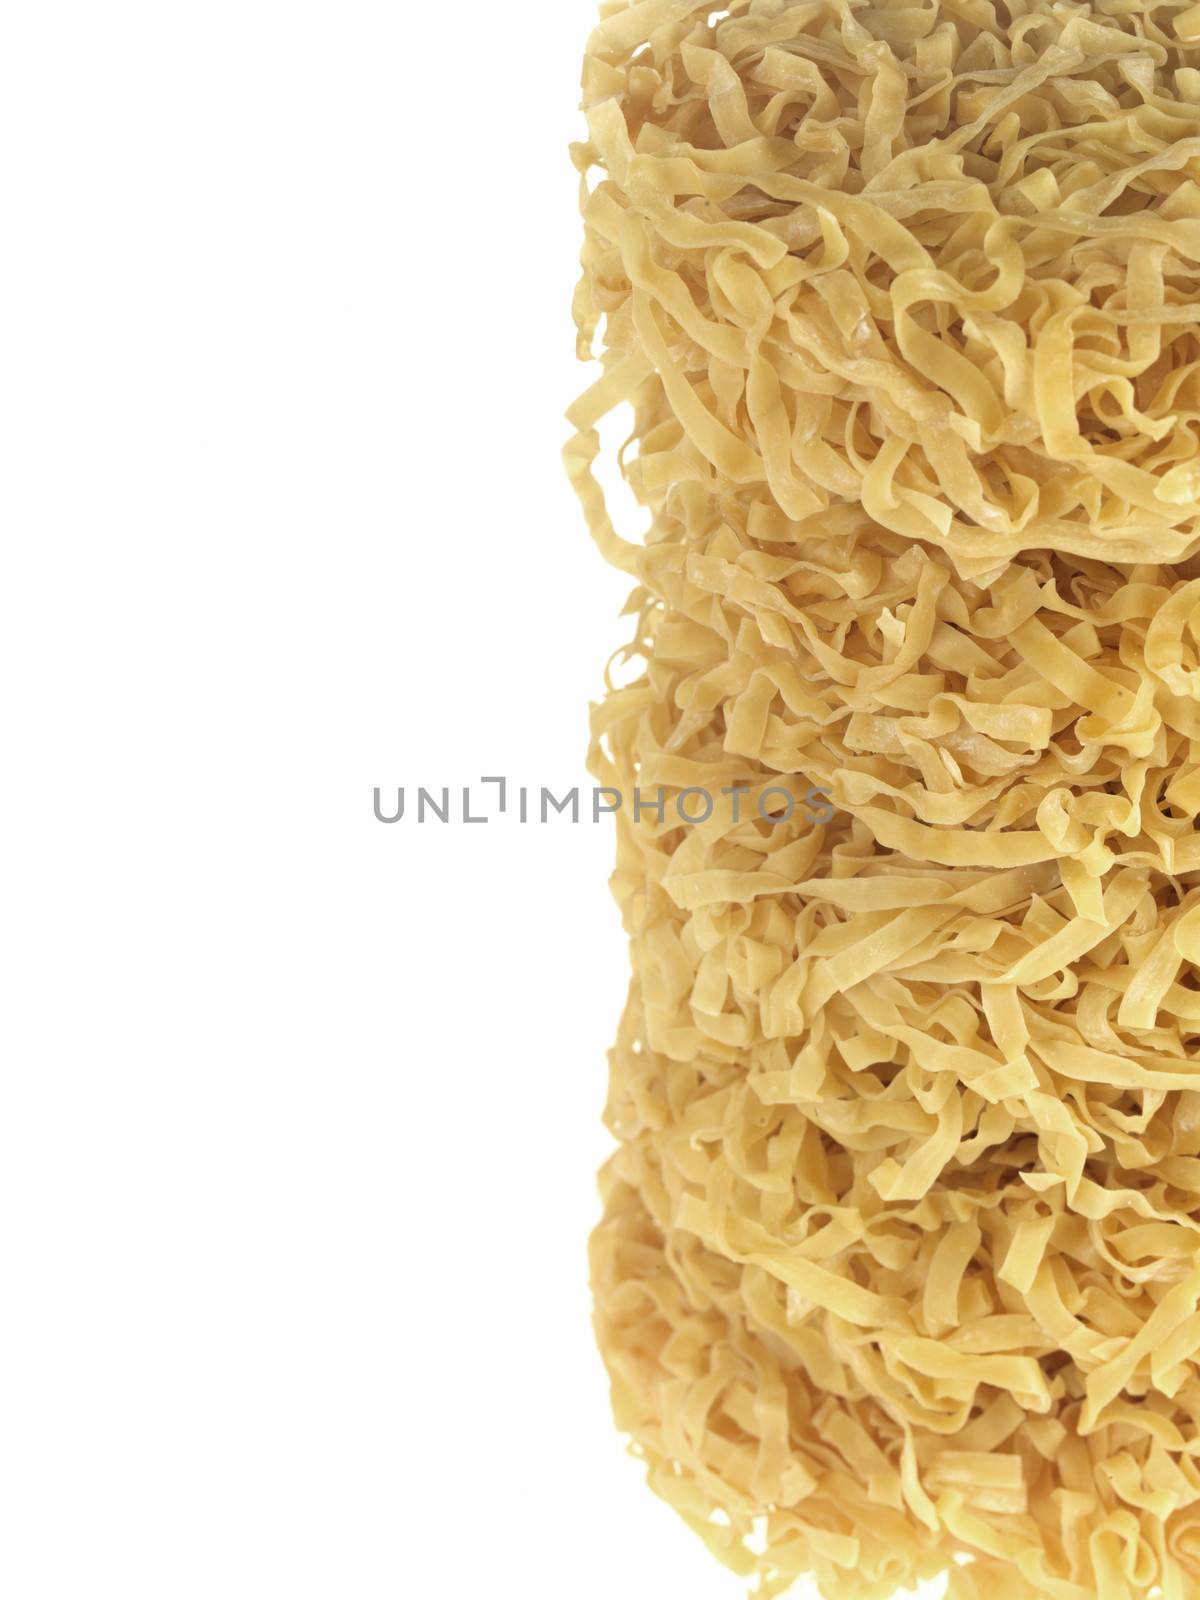 Dried Chinese Noodles